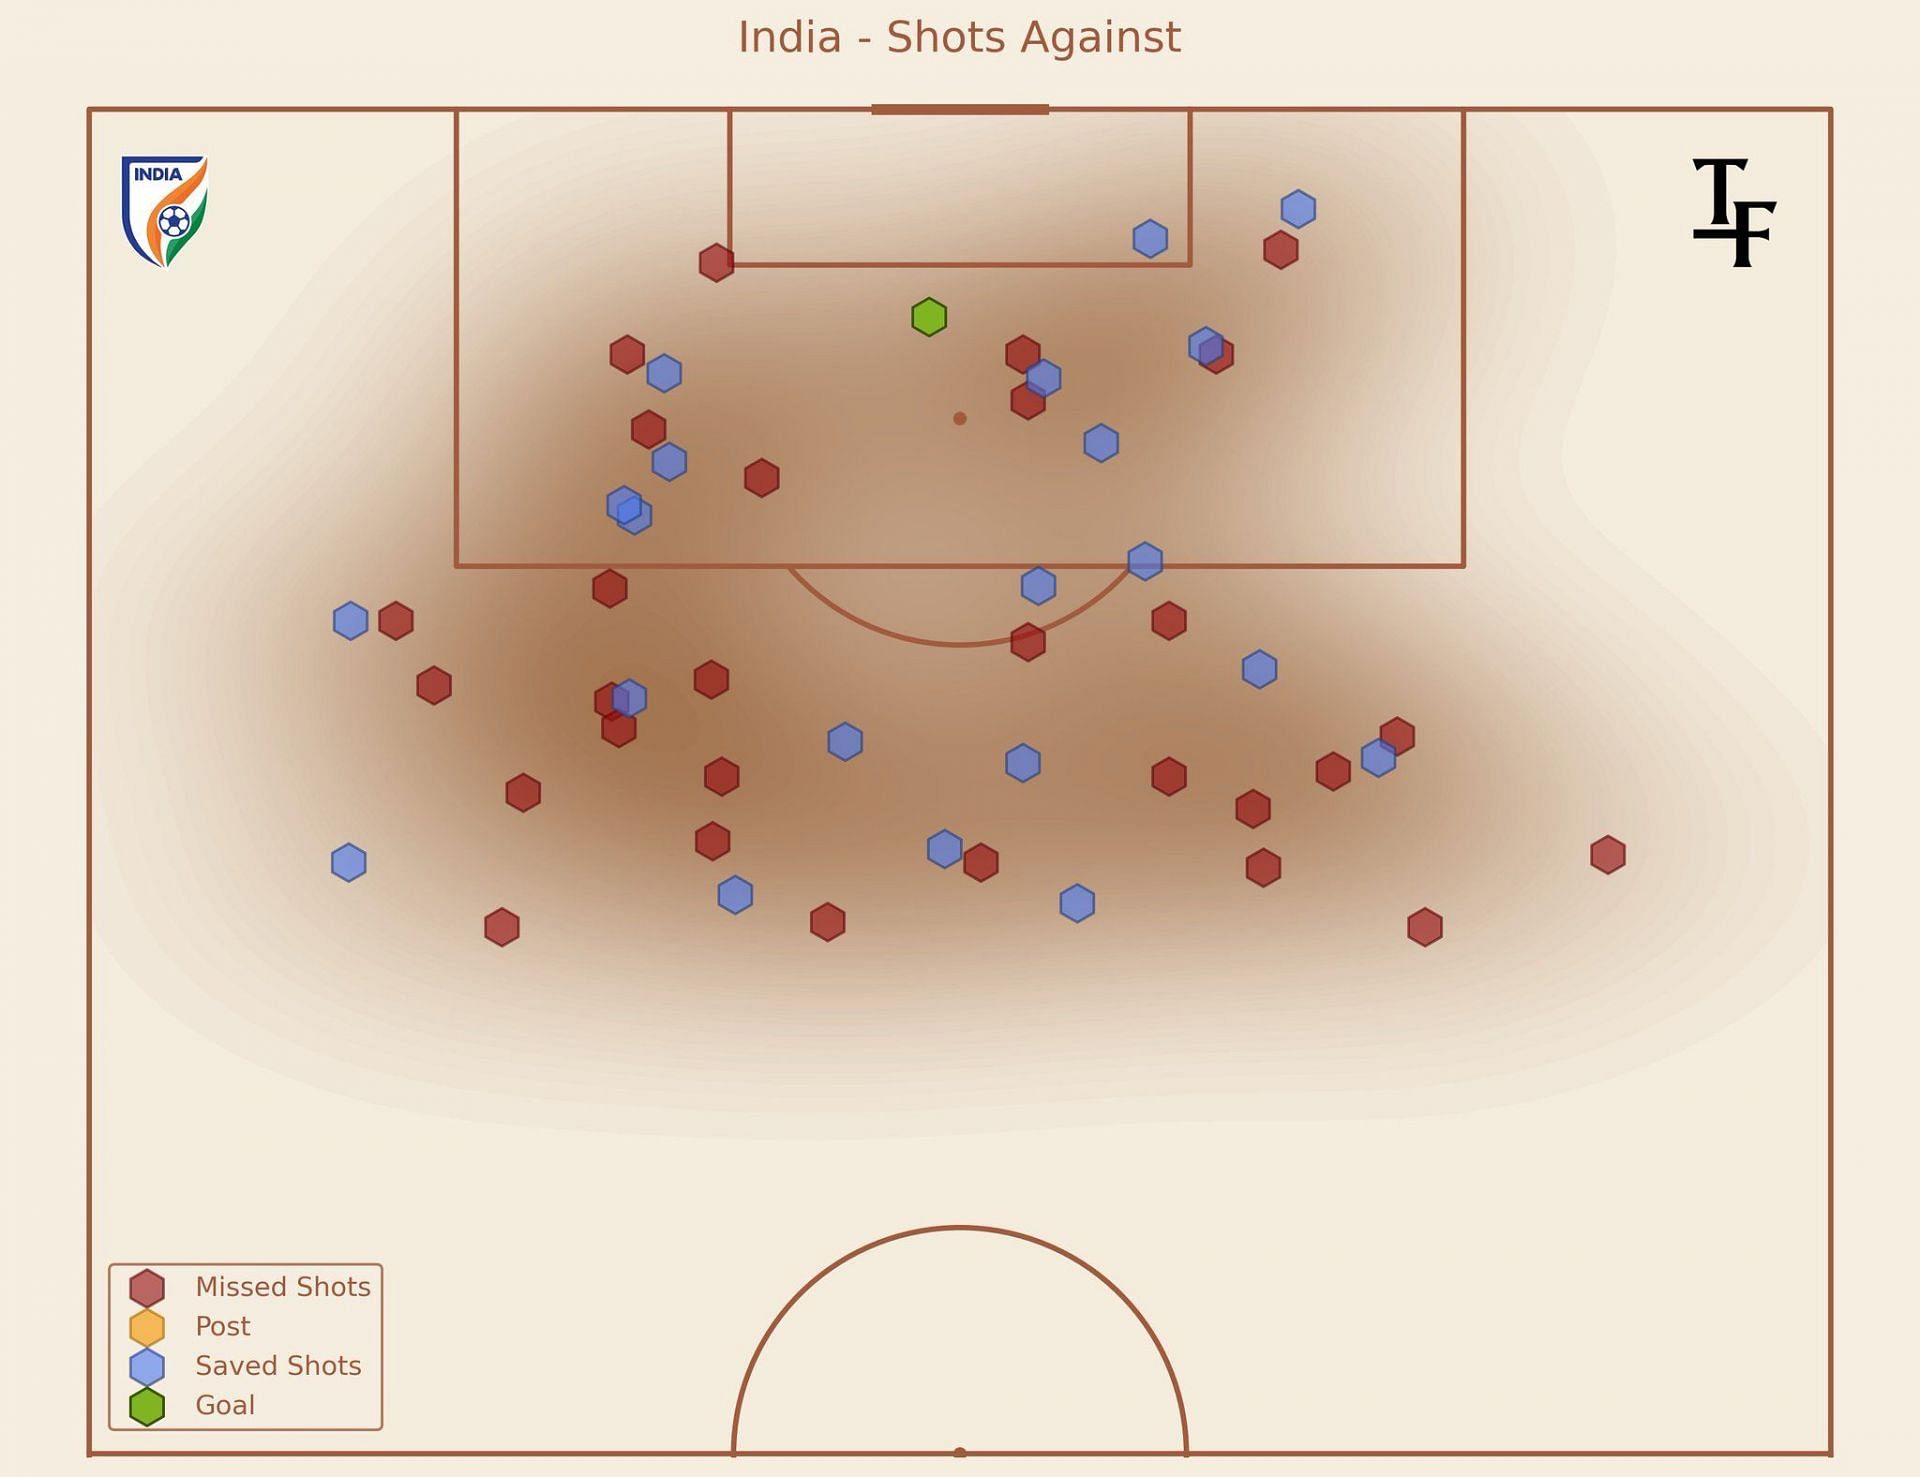 India&#039;s shots conceded map in the SAFF Championship (Image Credits: @totalf0otball - Twitter)